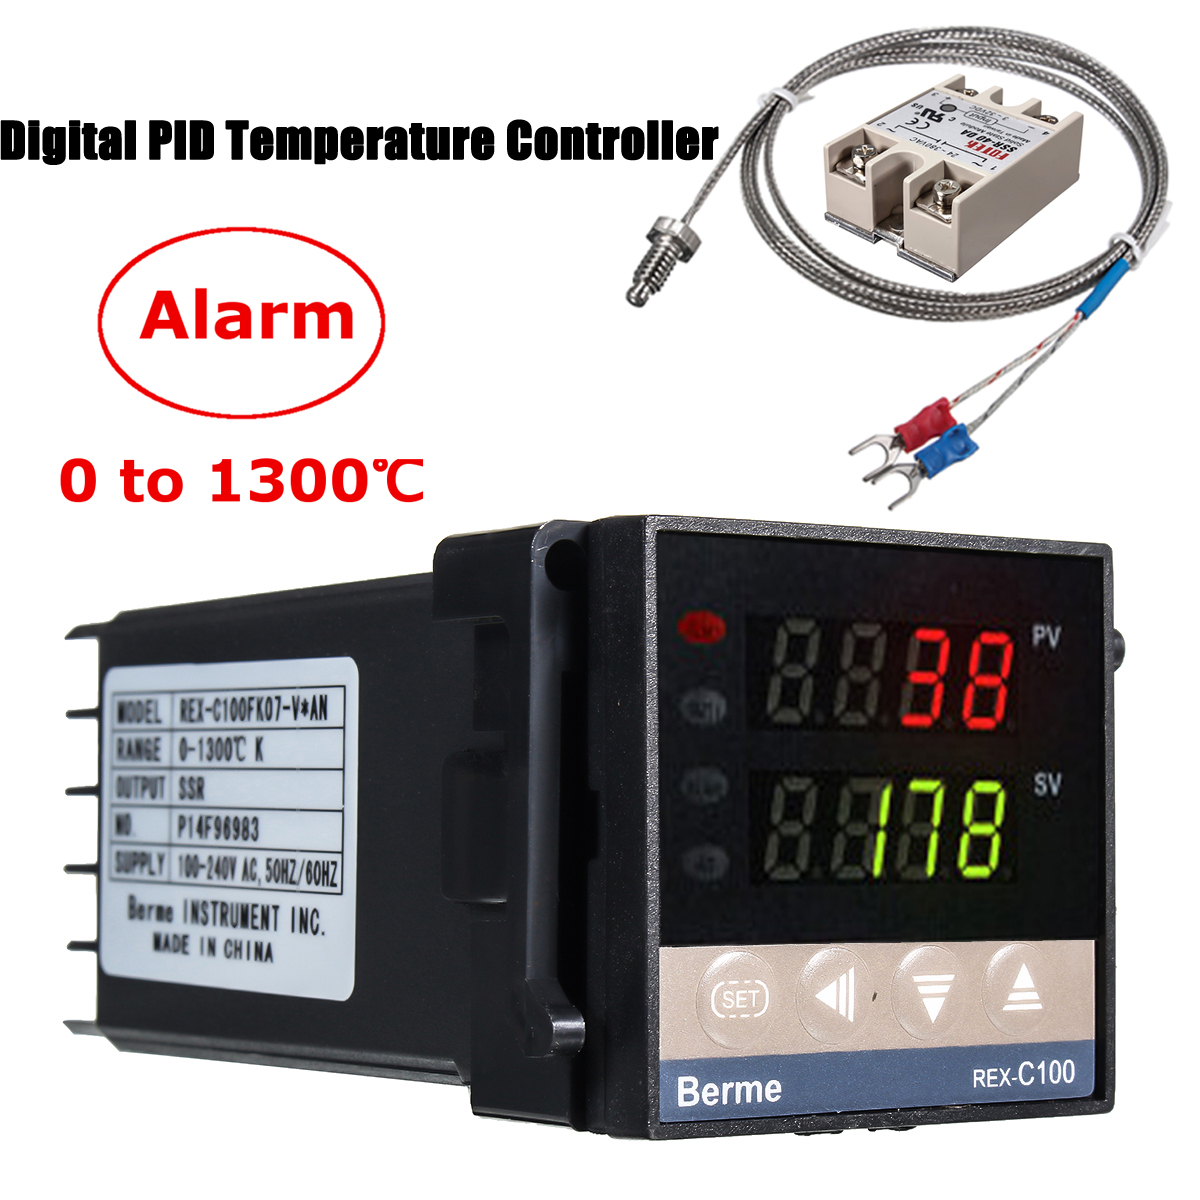 110-240V-01300-REX-C100-Digital-PID-Temperature-Controller-Kit-Alarm-Function-With-Probe-Relay-1351235-4